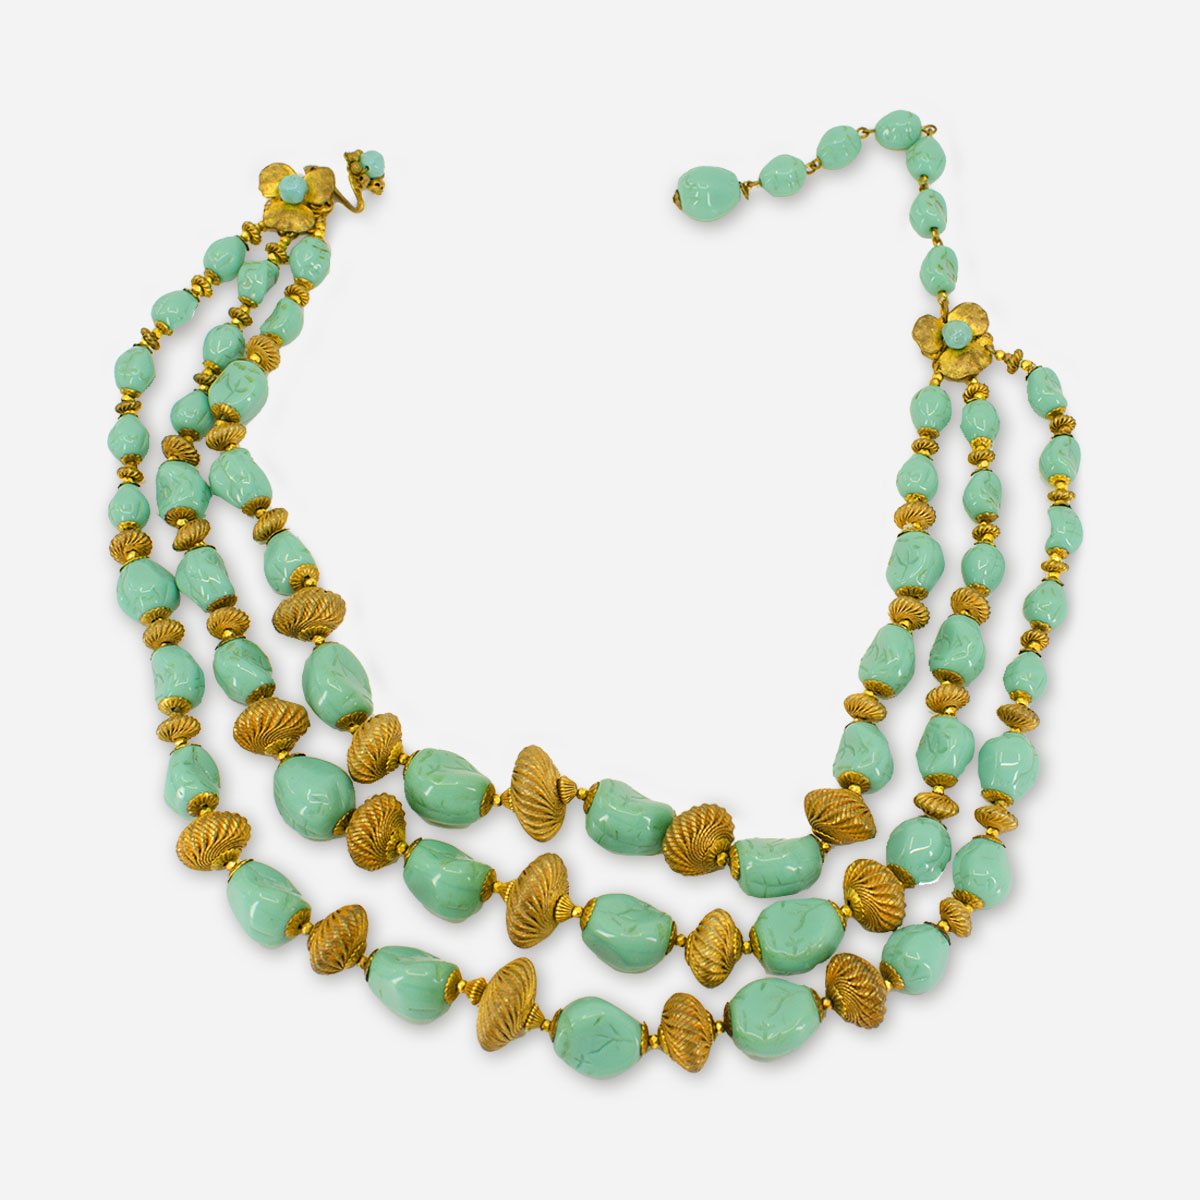 Miriam Haskell Turquoise Necklace, Glass & Gold Beads